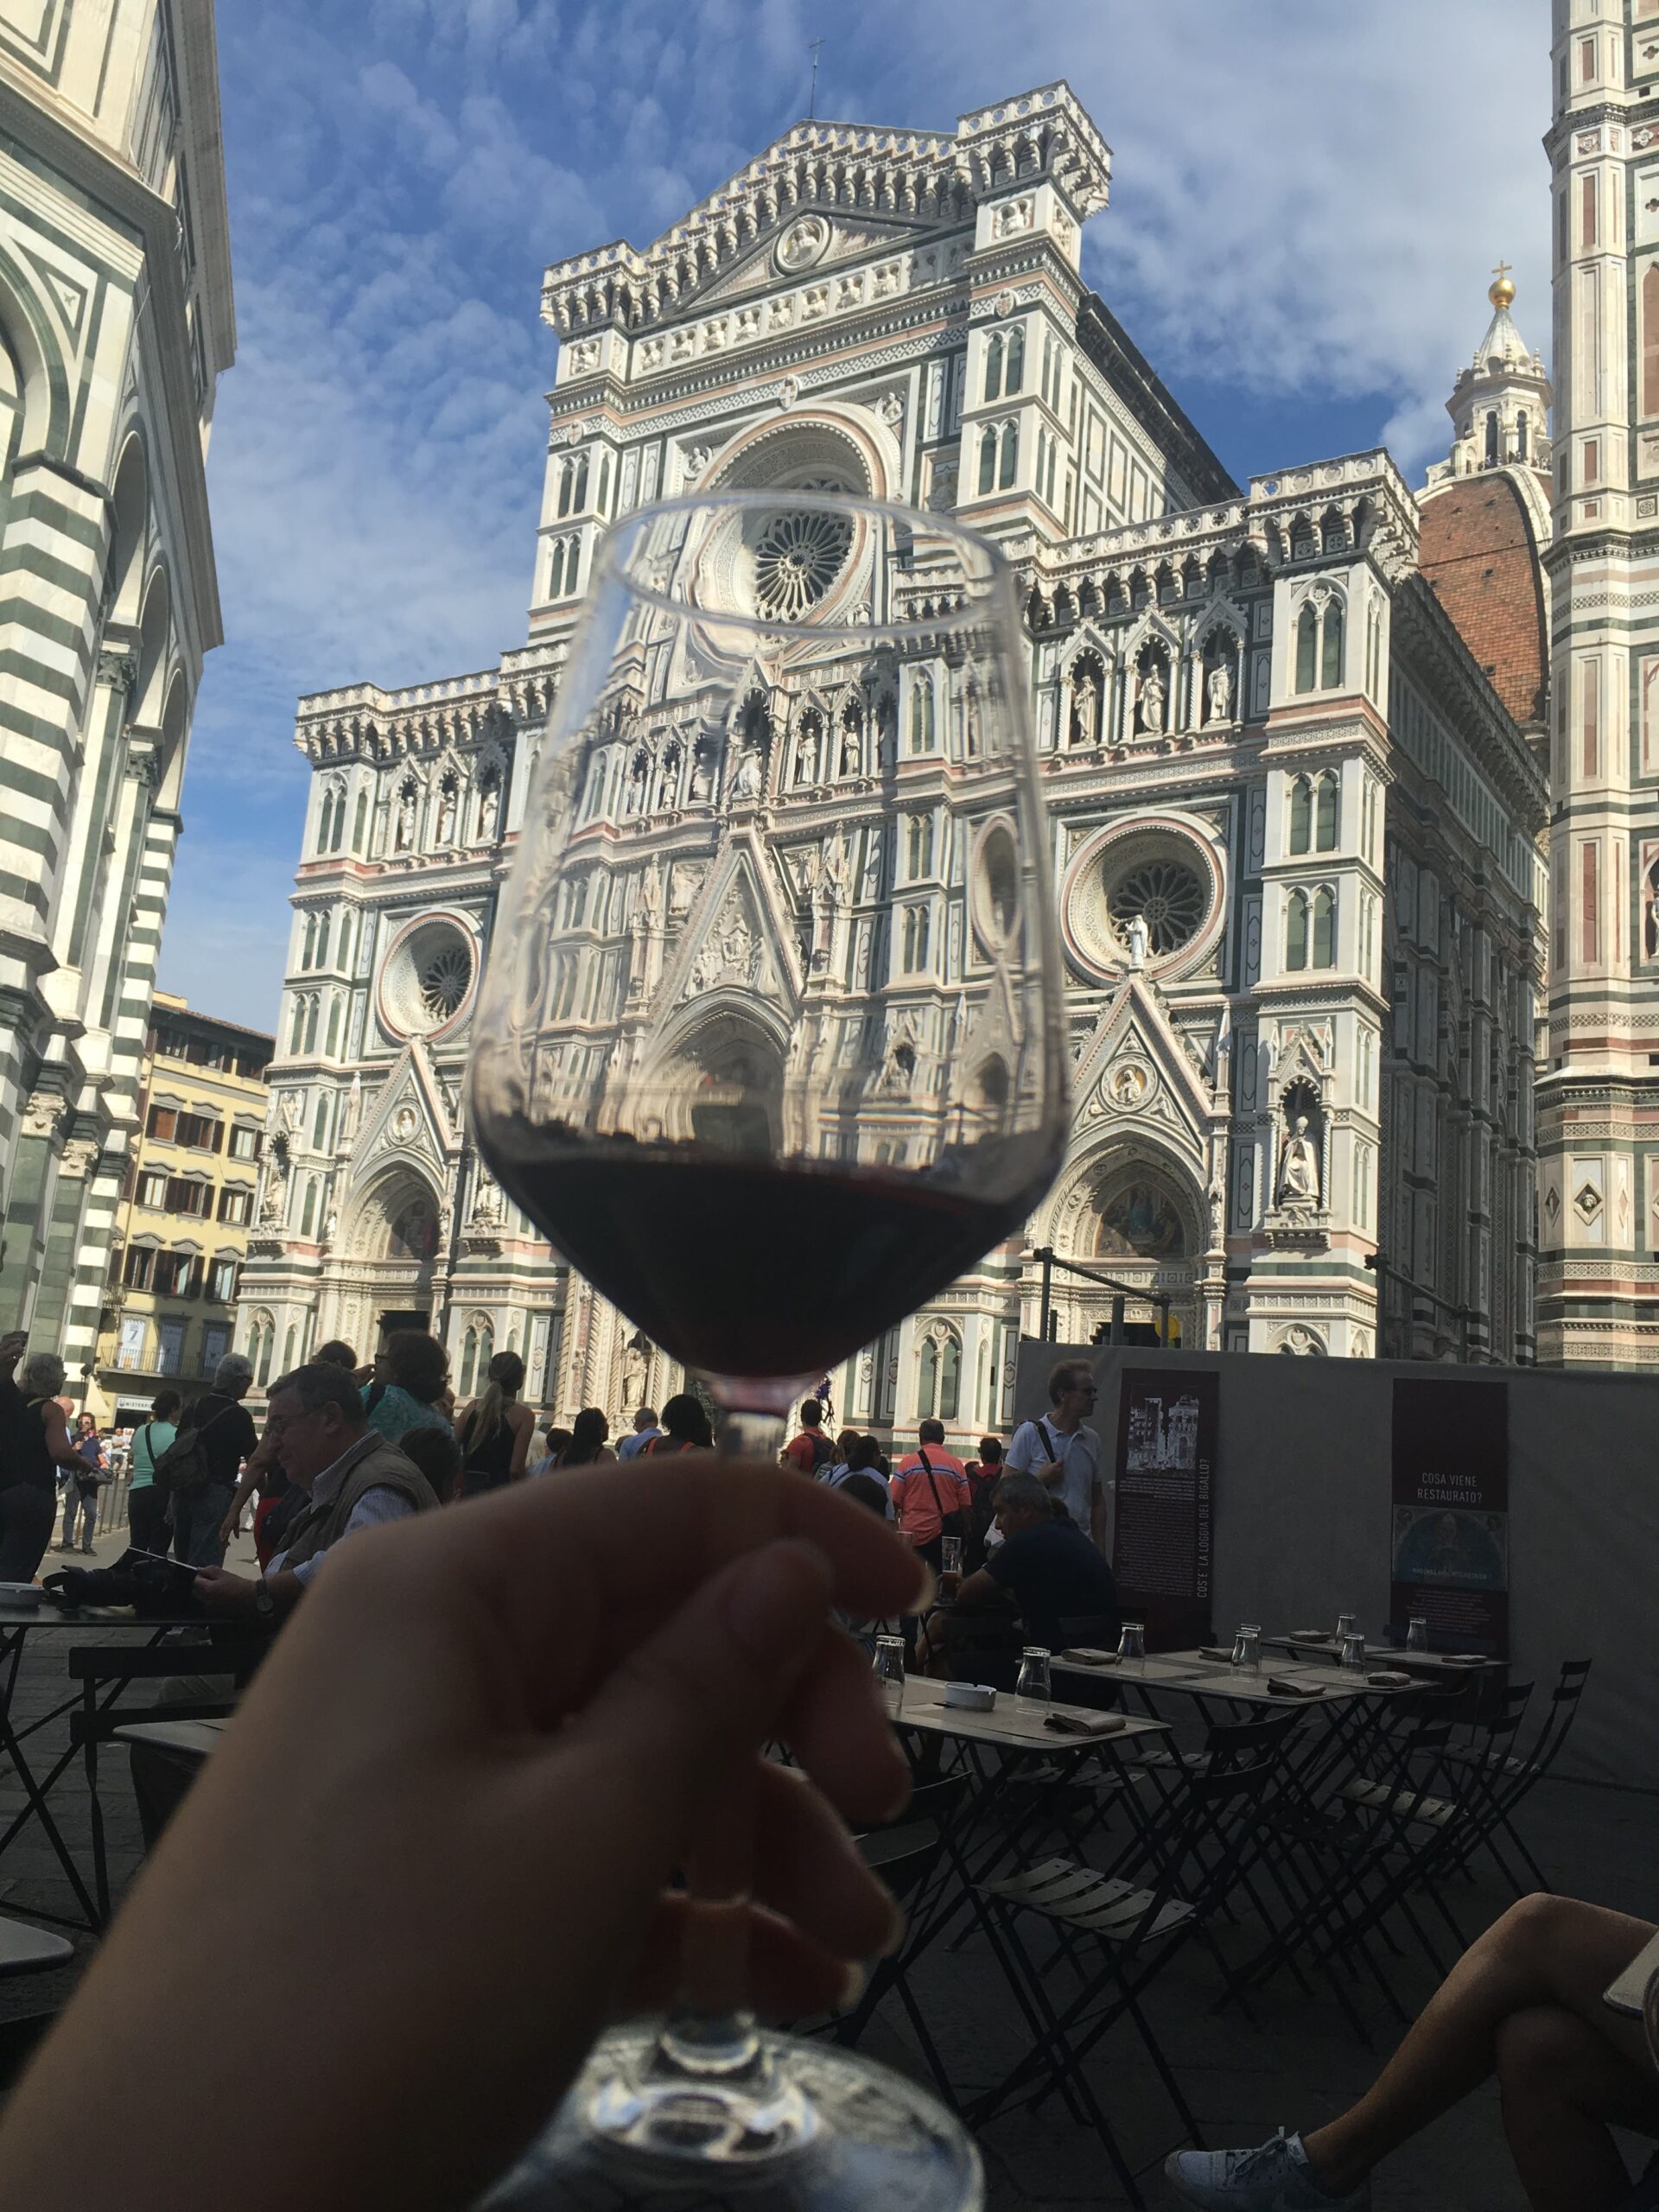 The Duomo behind a glass of wine